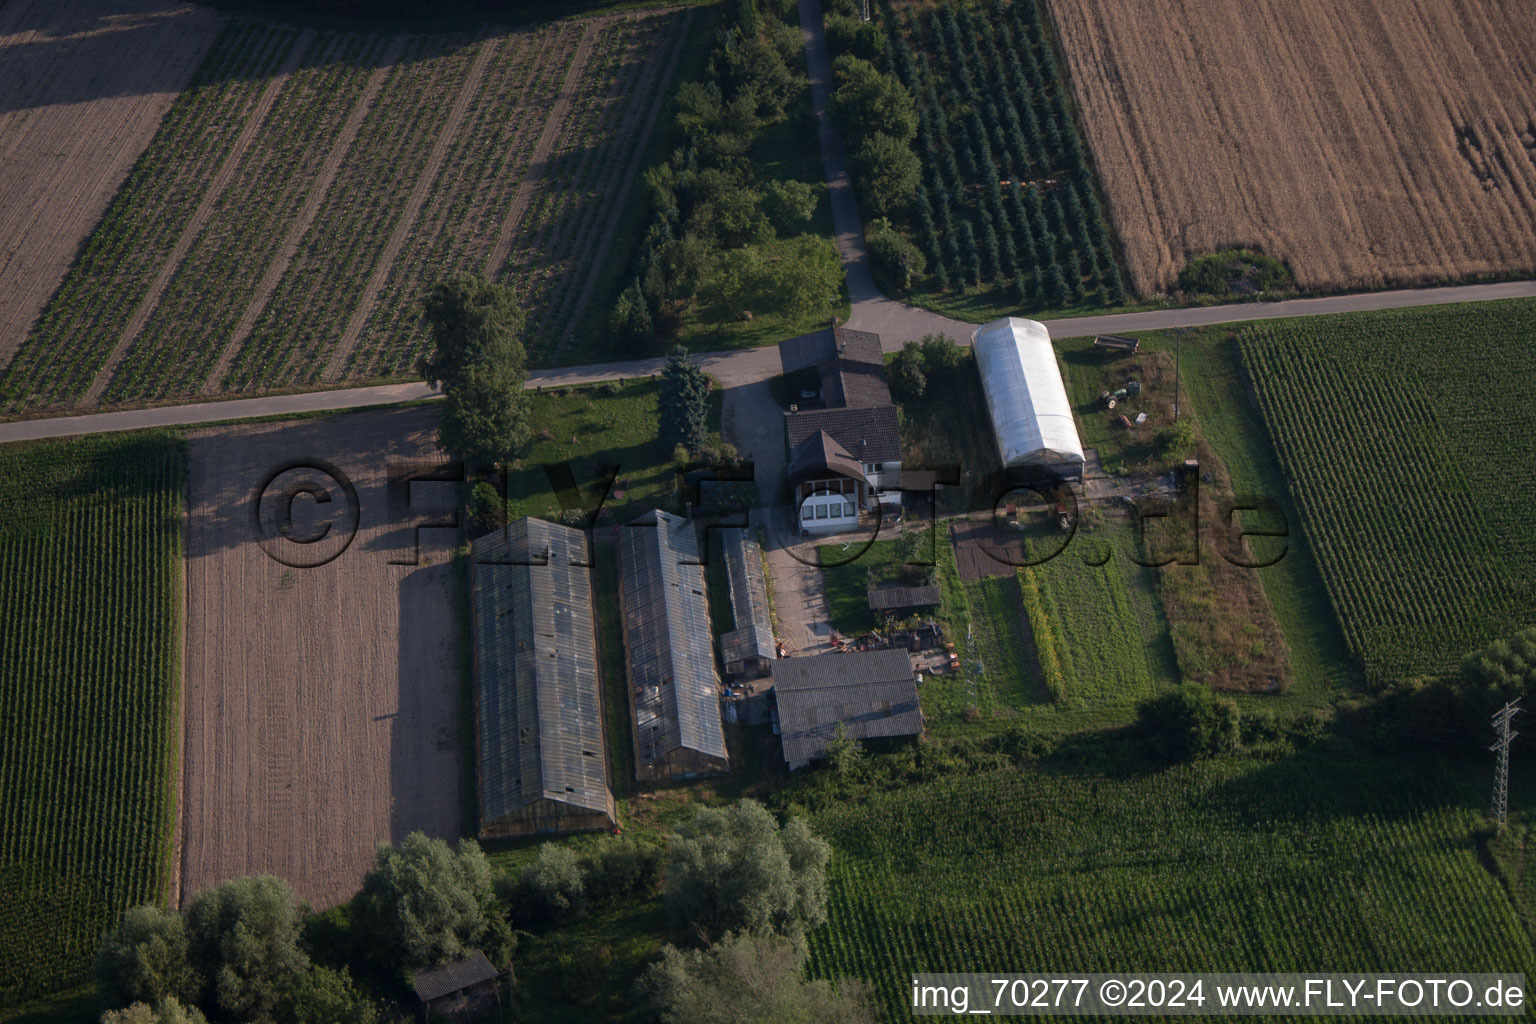 Aerial photograpy of Gardening at Erlenbach in Erlenbach bei Kandel in the state Rhineland-Palatinate, Germany